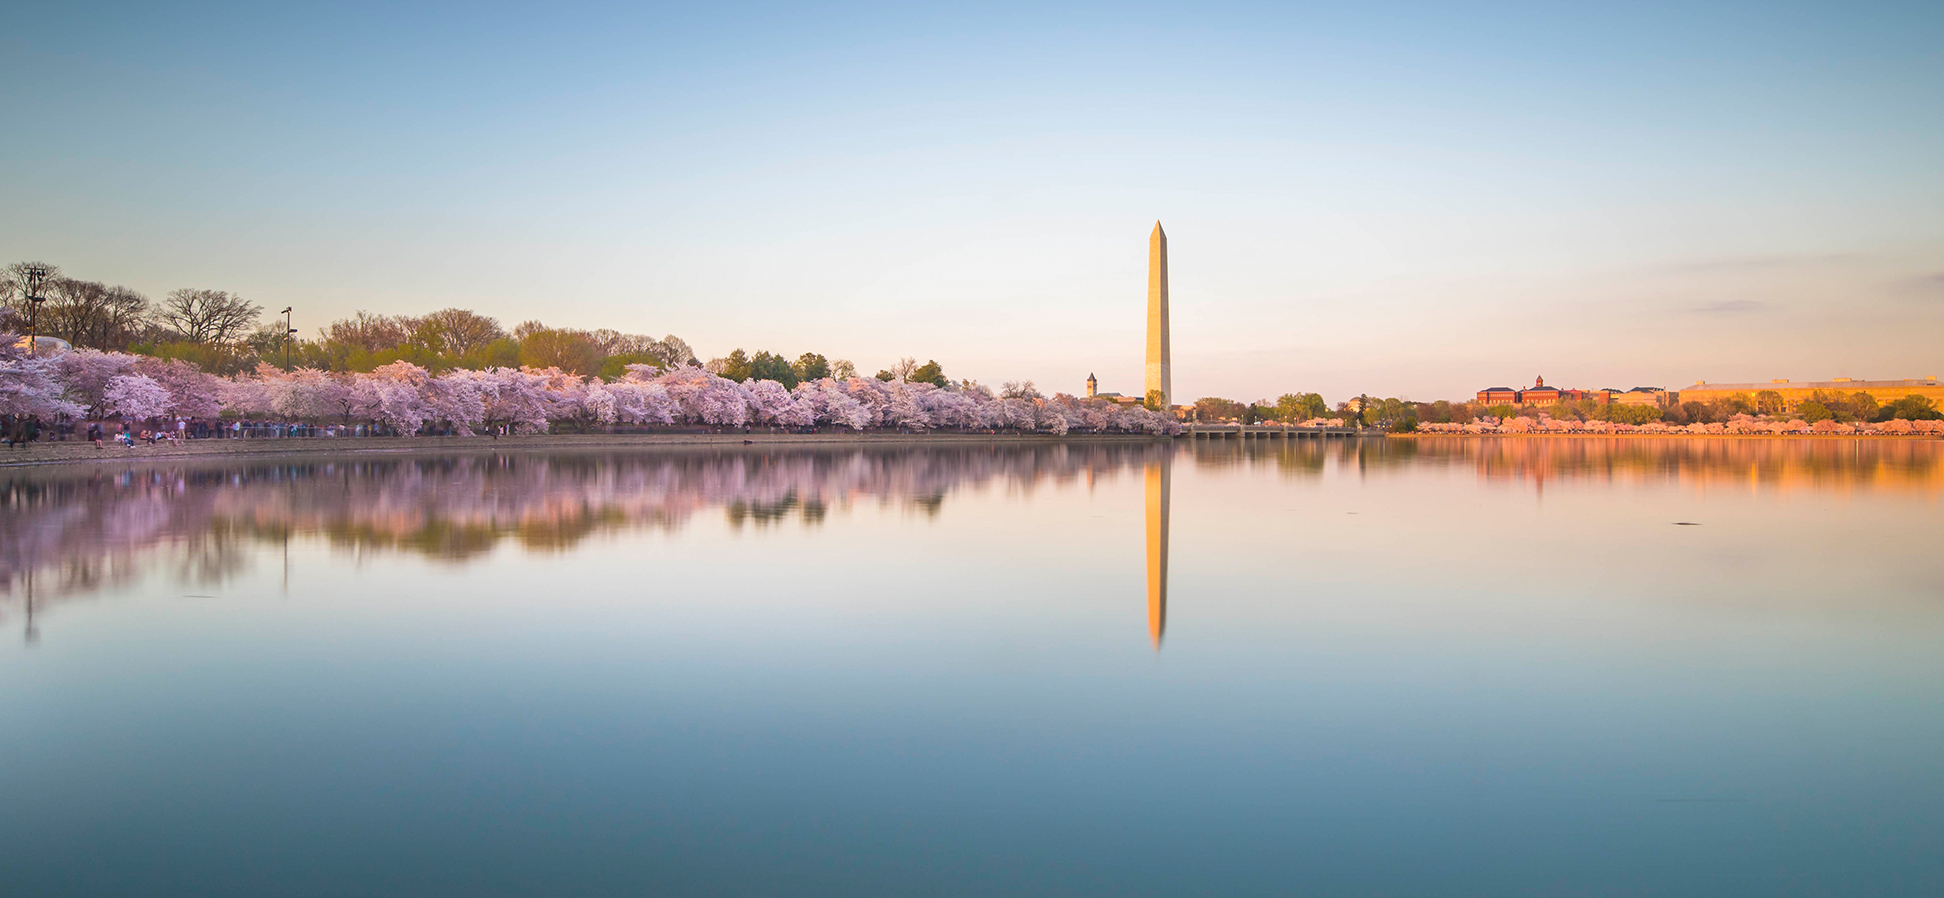 SpotHero Spring Picks: Our Top 9 Things to Do in DC This Spring